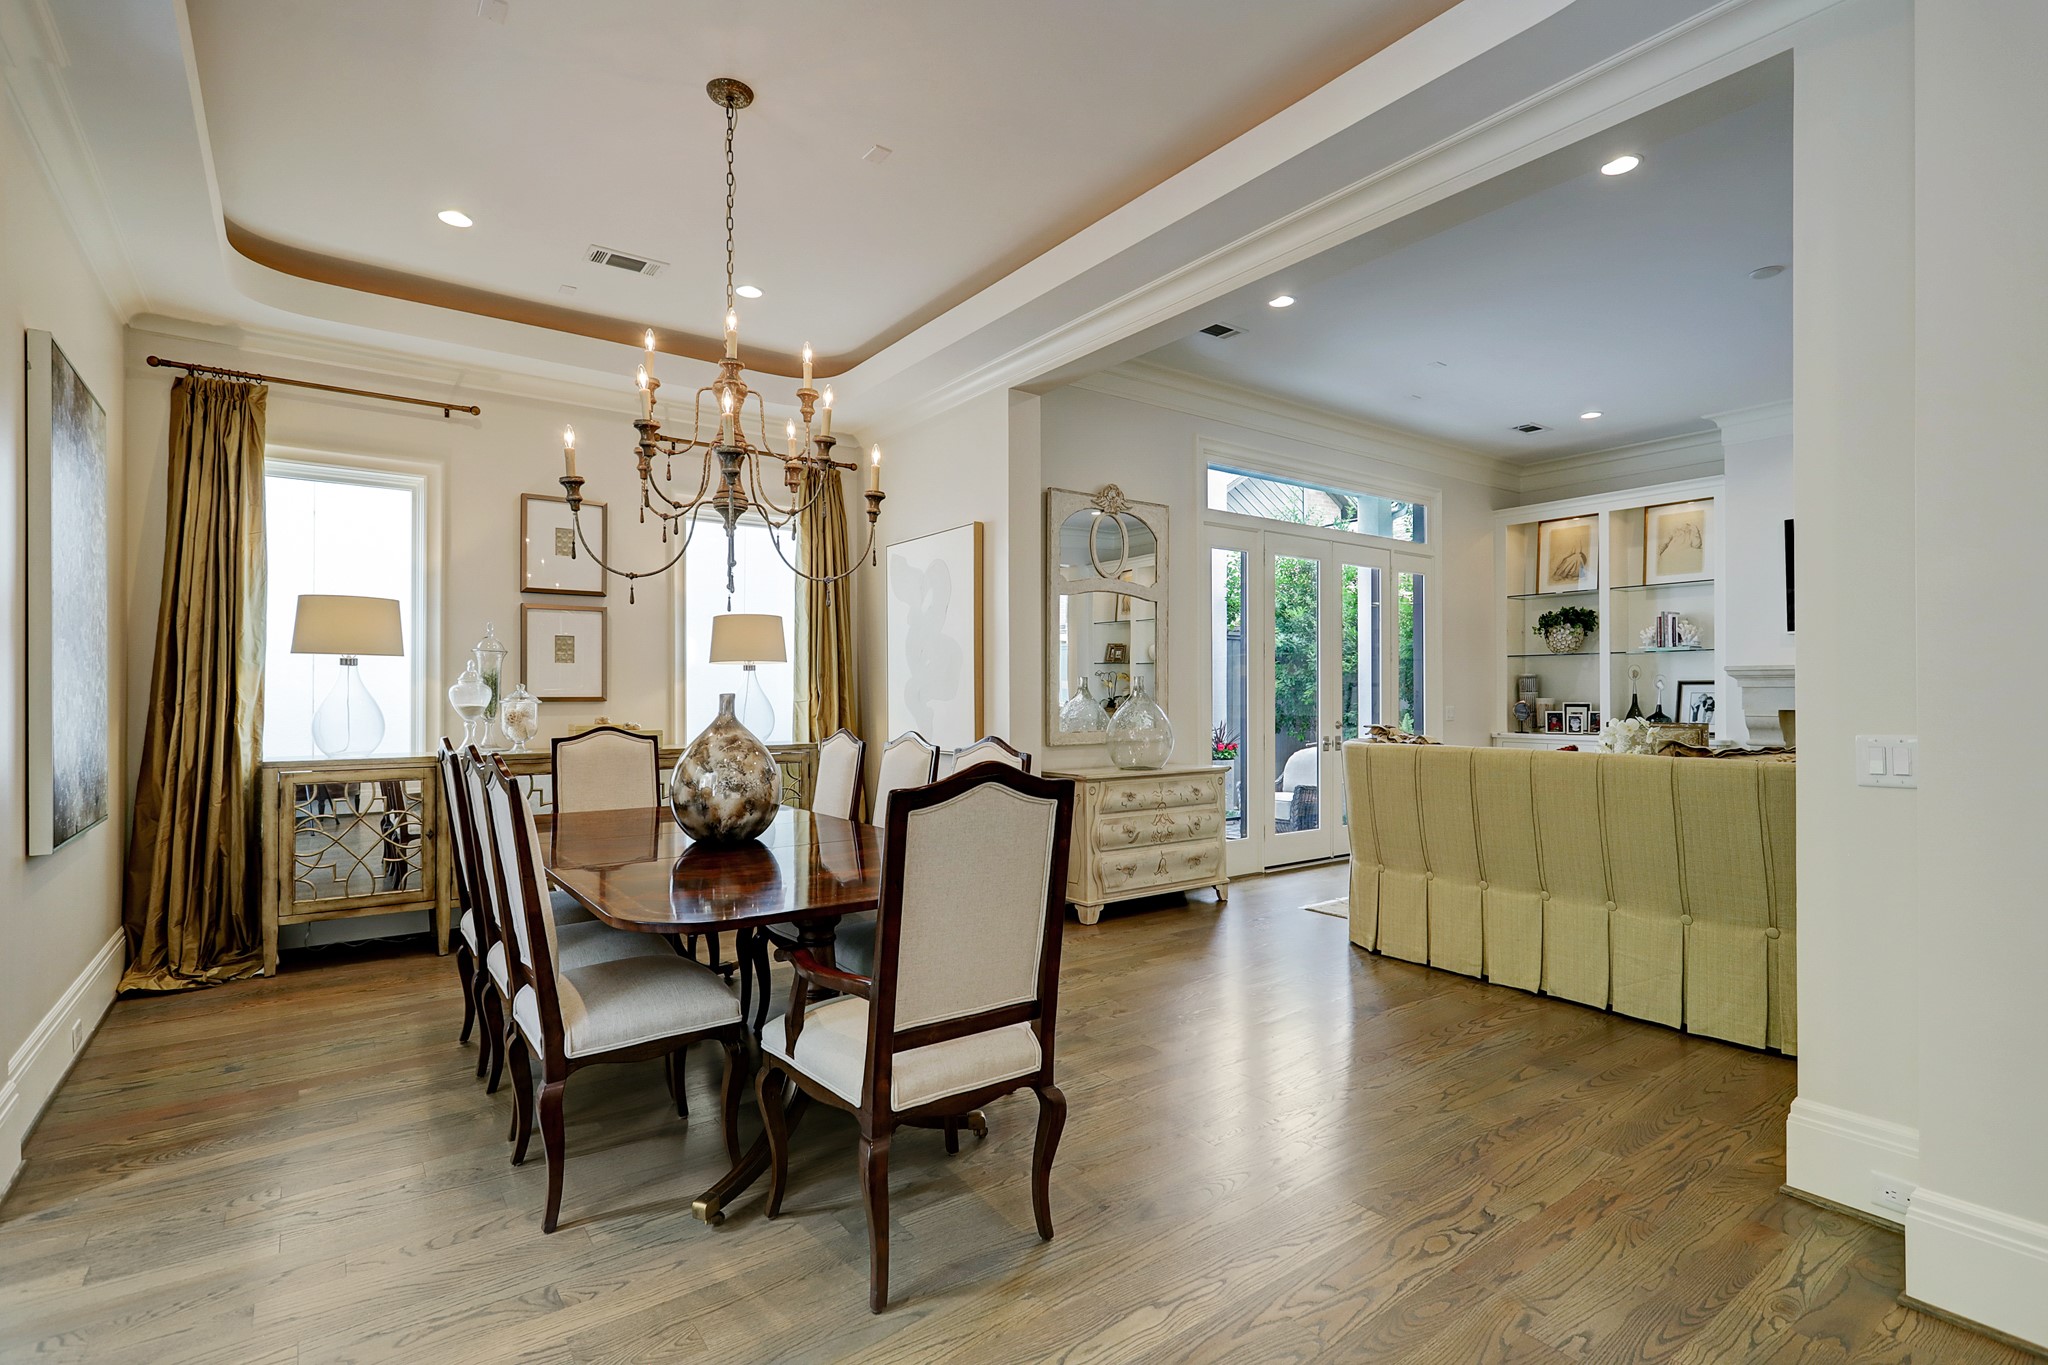 The elegant dining room has a cove ceiling with a gorgeous designer chandelier and large picture windows offer an abundance of natural light.